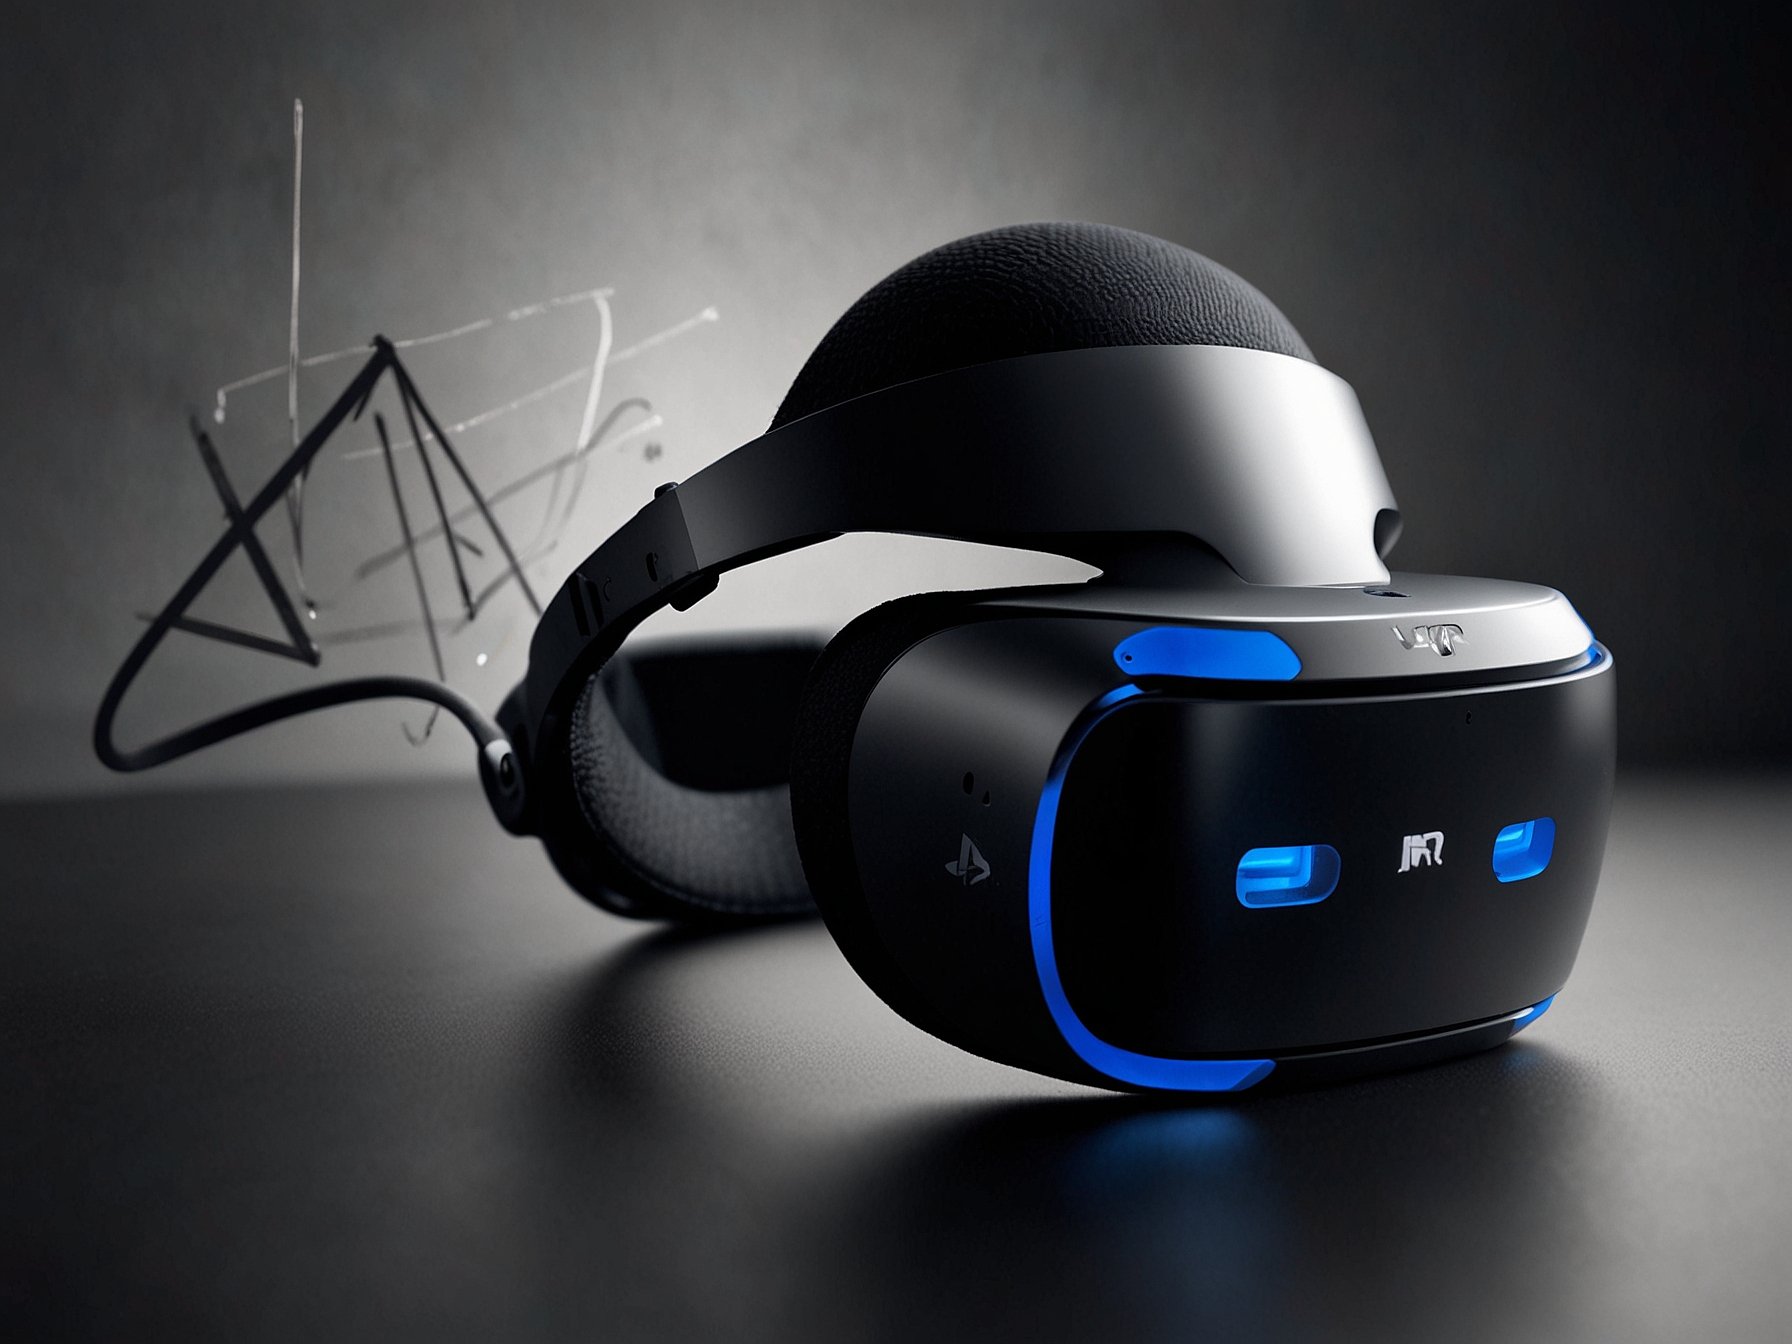 A depiction of the PlayStation VR2 headset, representing Sony's evolving approach to virtual reality gaming amidst cutbacks in VR game development.